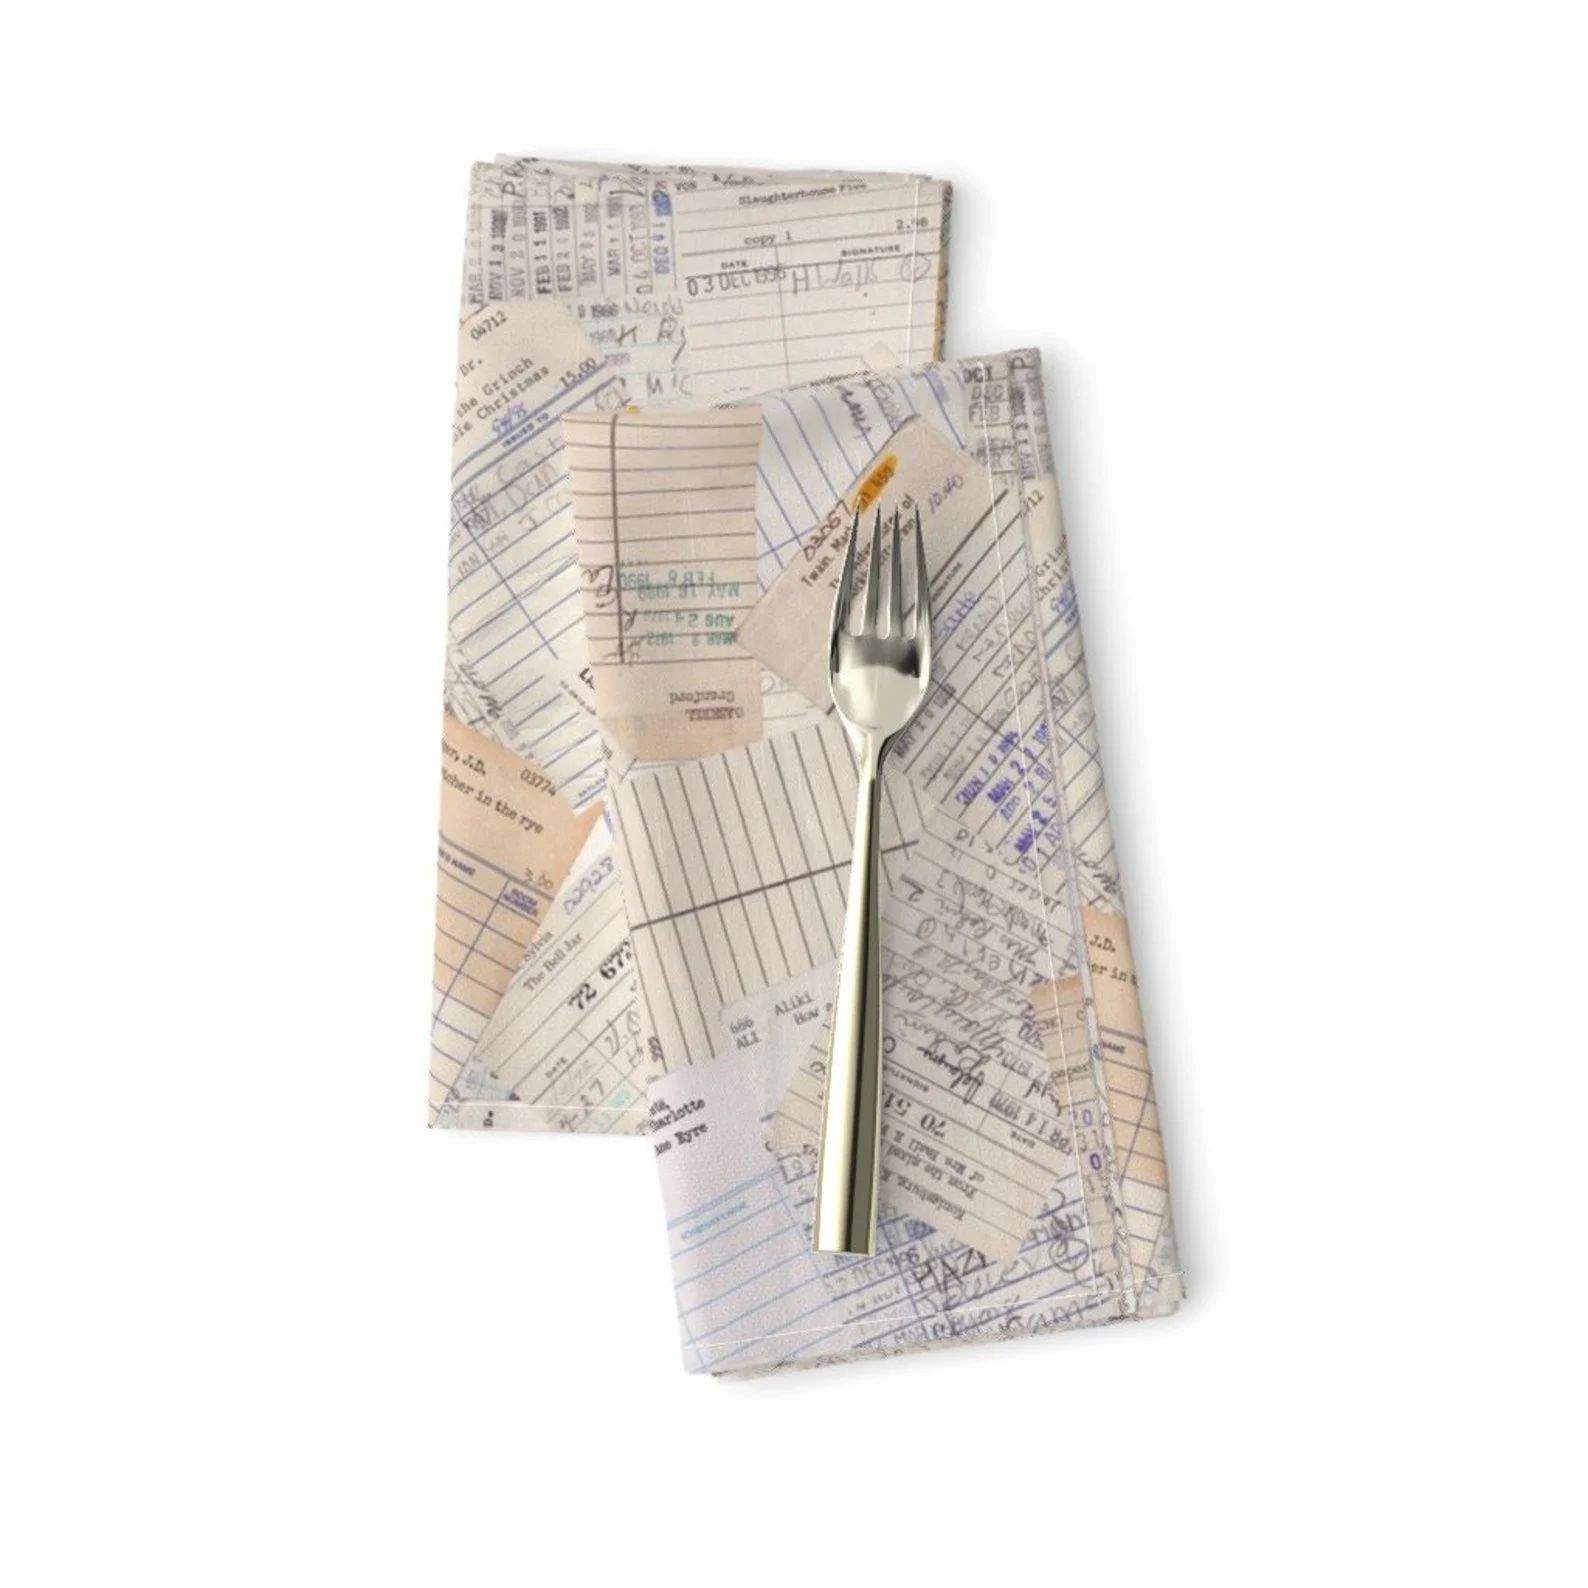 A fork, and two cloth napkins decorated with library date due stamps.